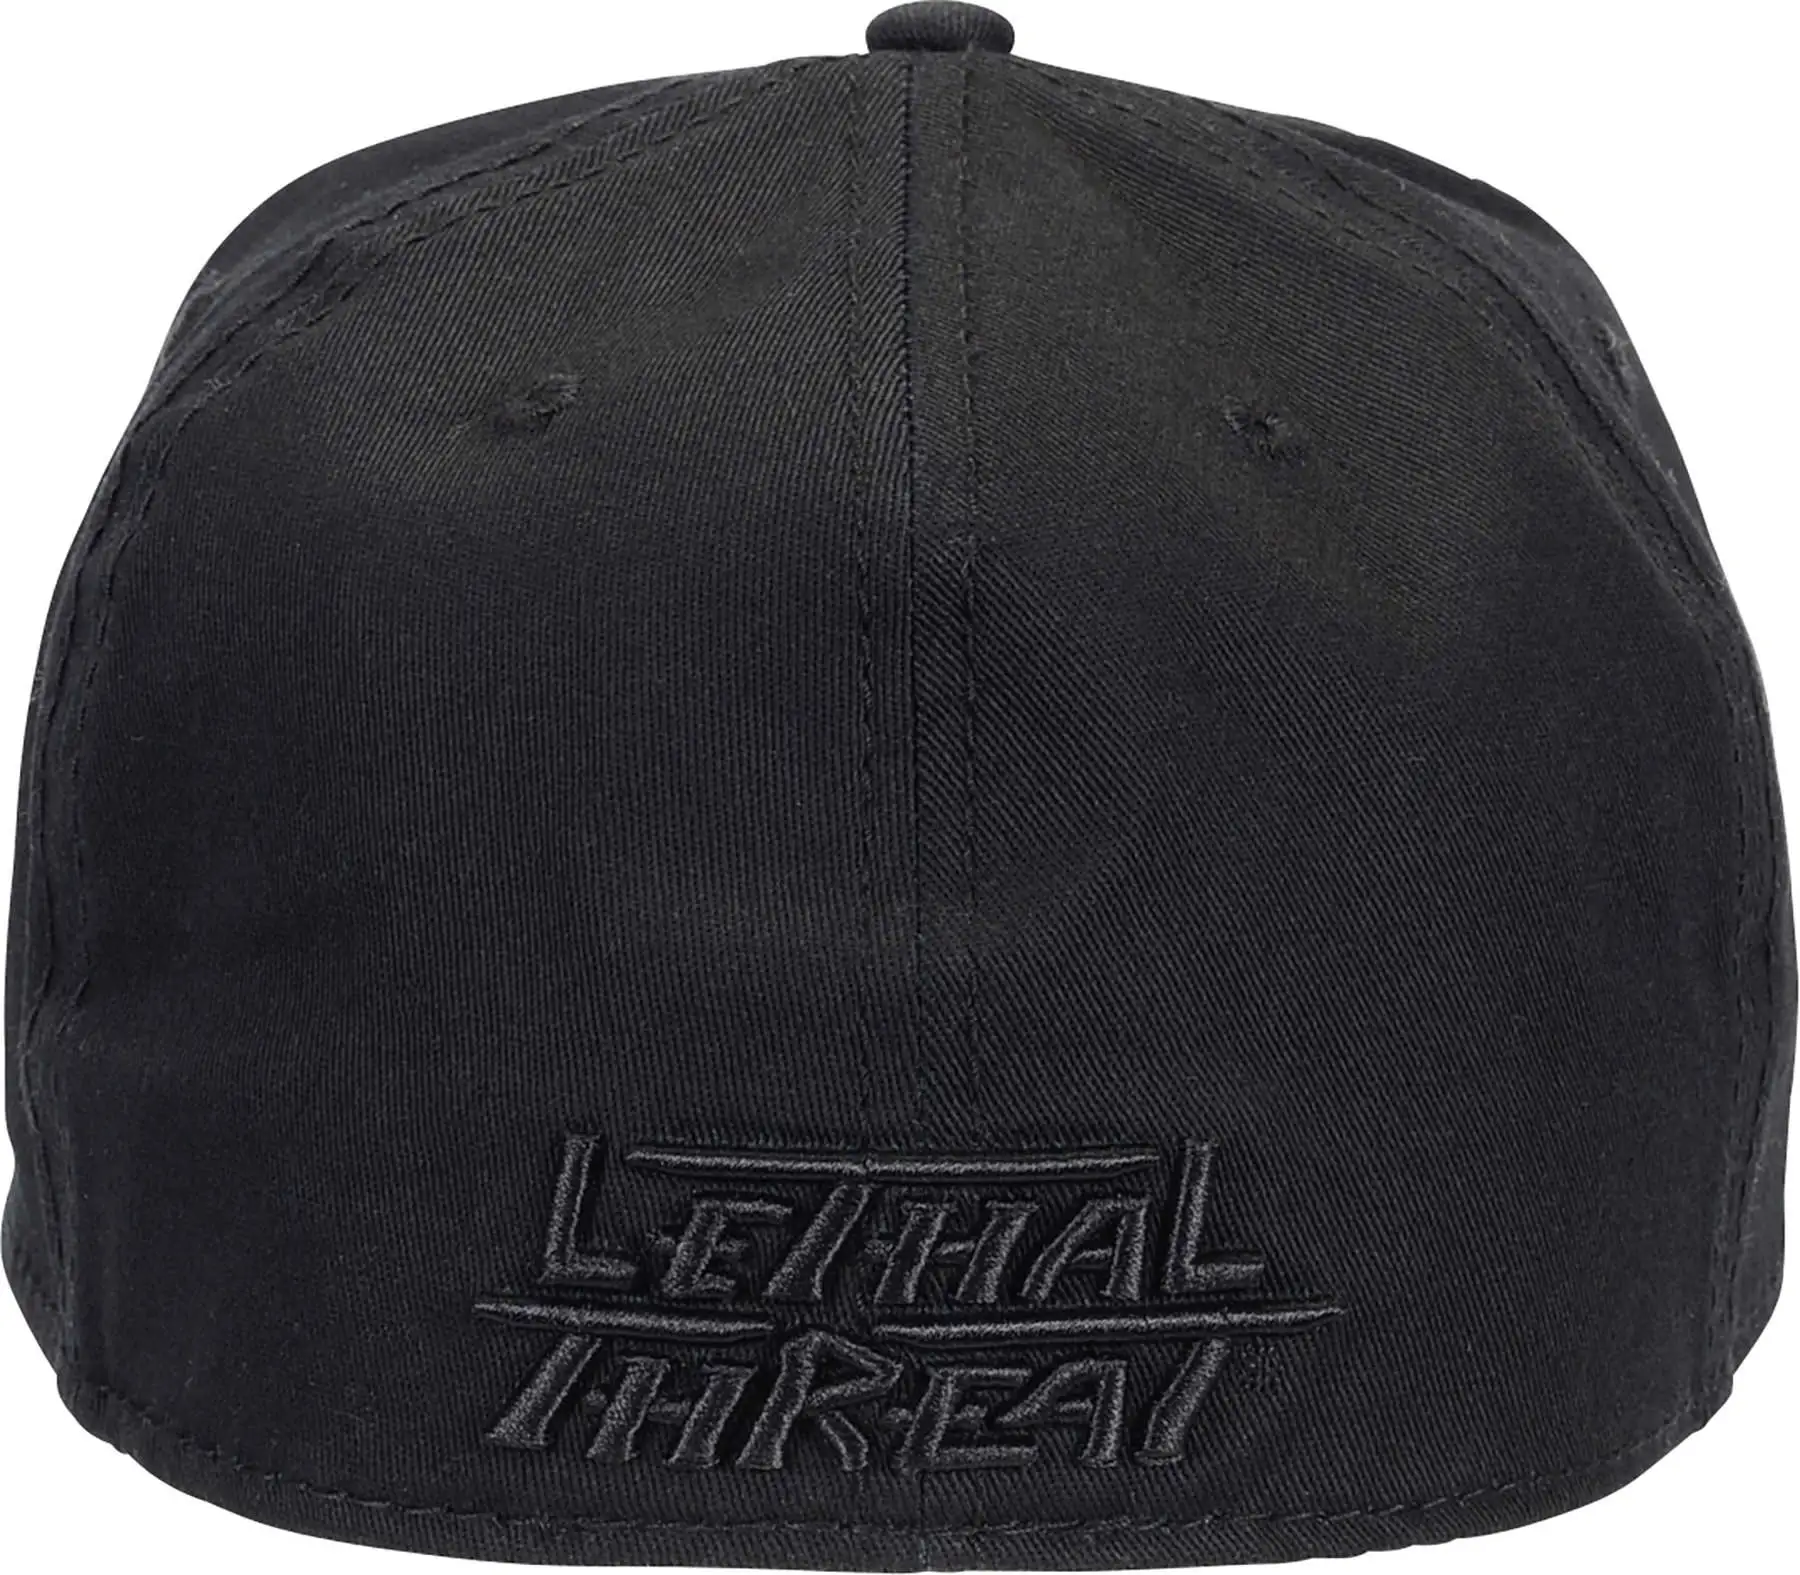 LETHAL THREAT CASQUETTE